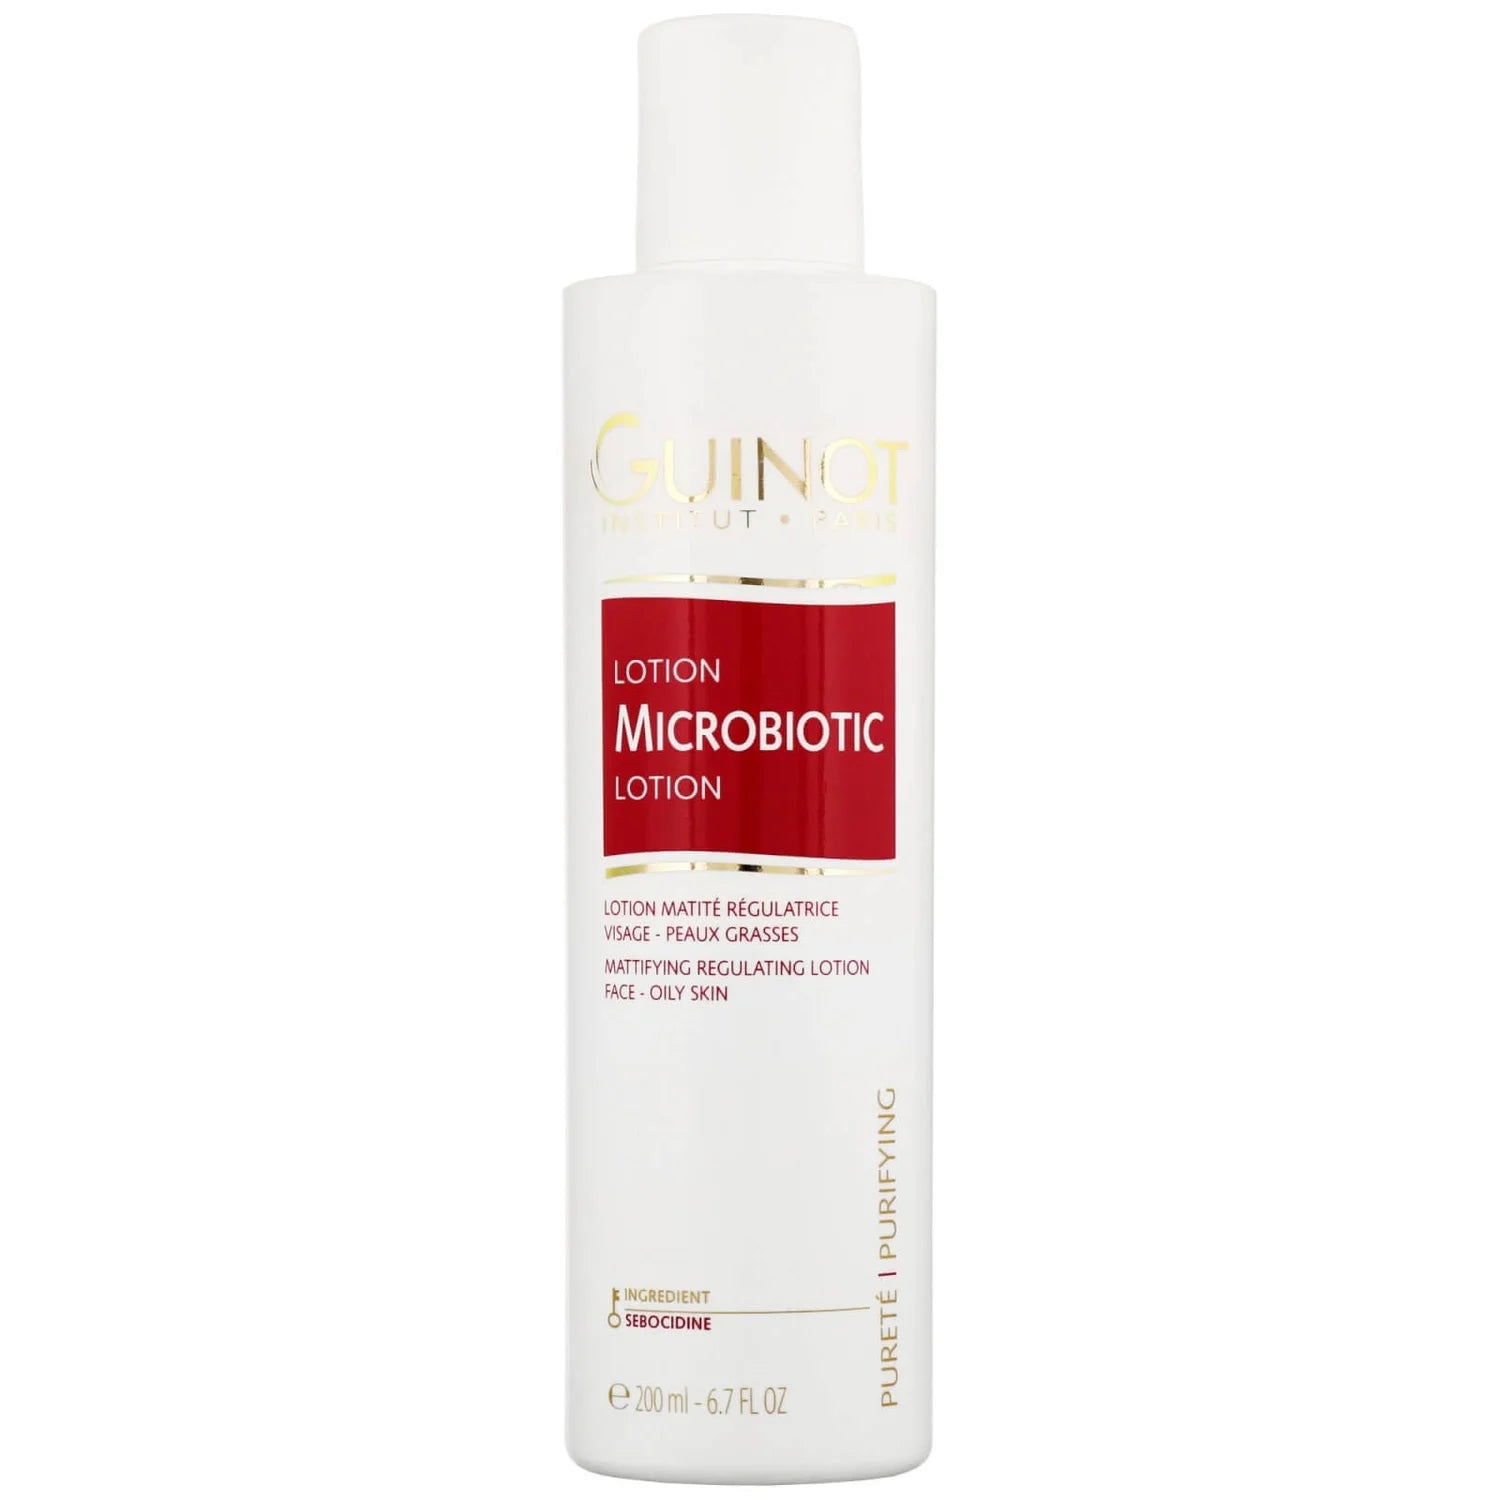 Guinot Microbiotic Purifying Lotion Toner  product image.,